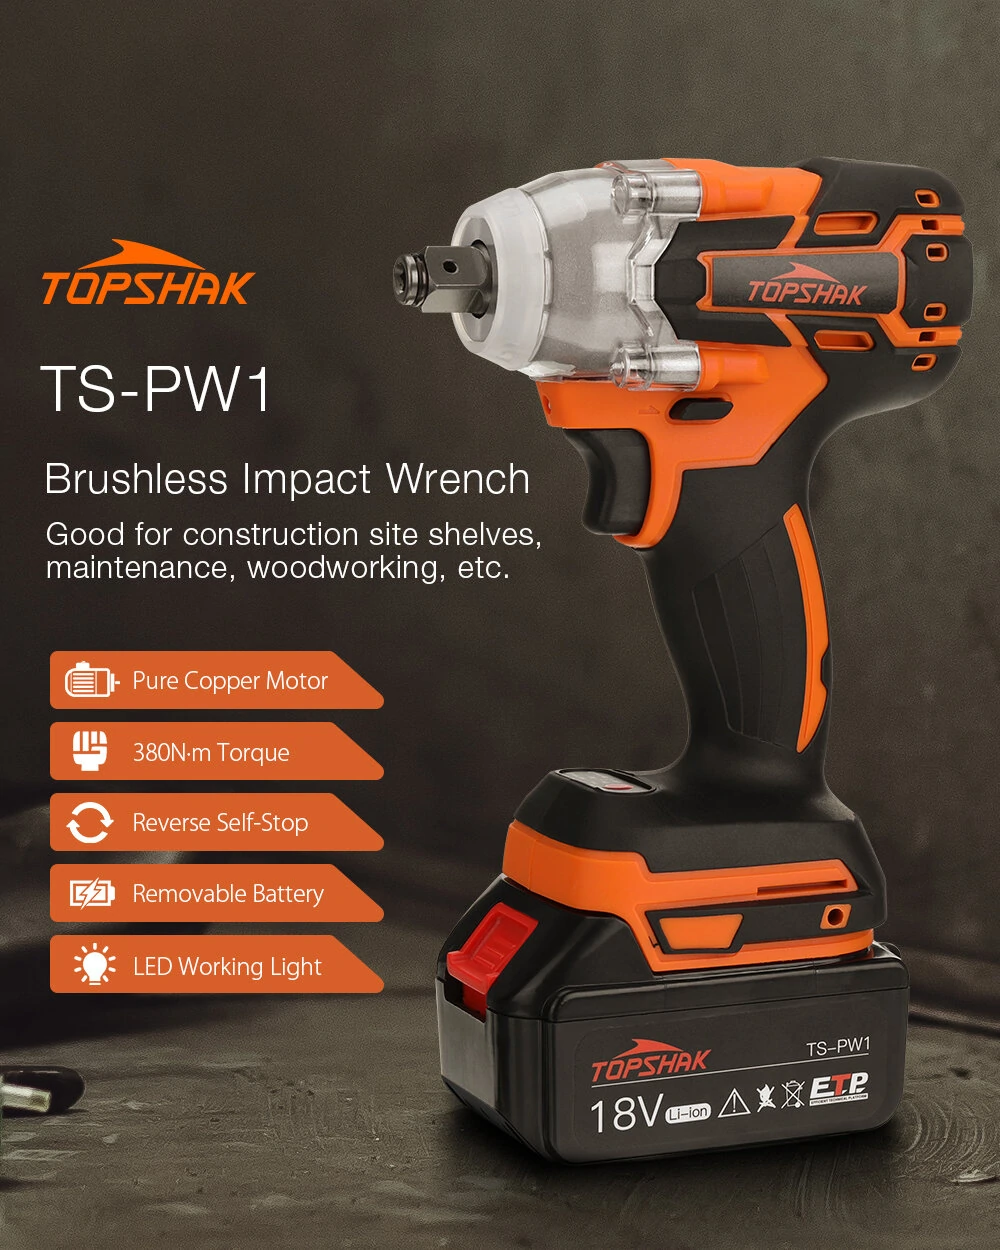 Topshak TS-PW1 - screws with impact and doesn't cost much